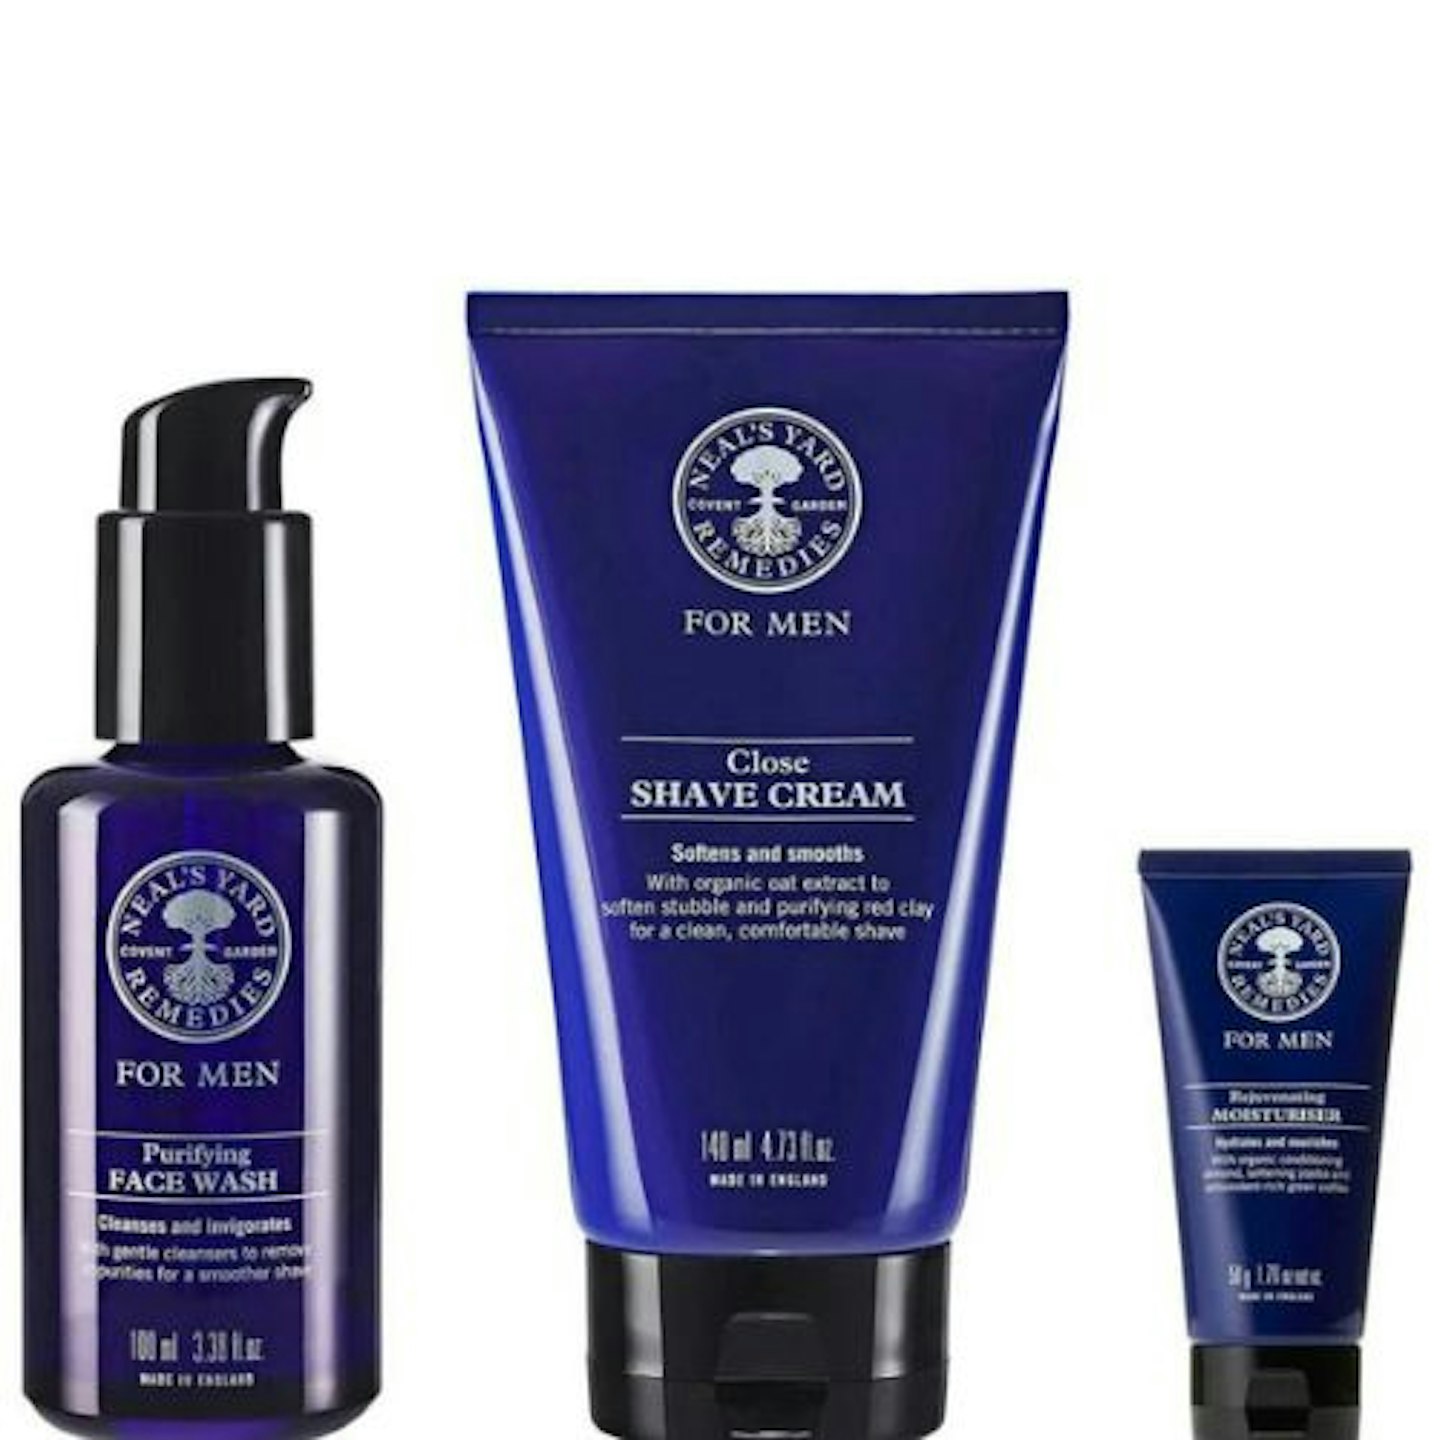 First Father's Day Gifts: Neal’s Yard Remedies Men's Collection